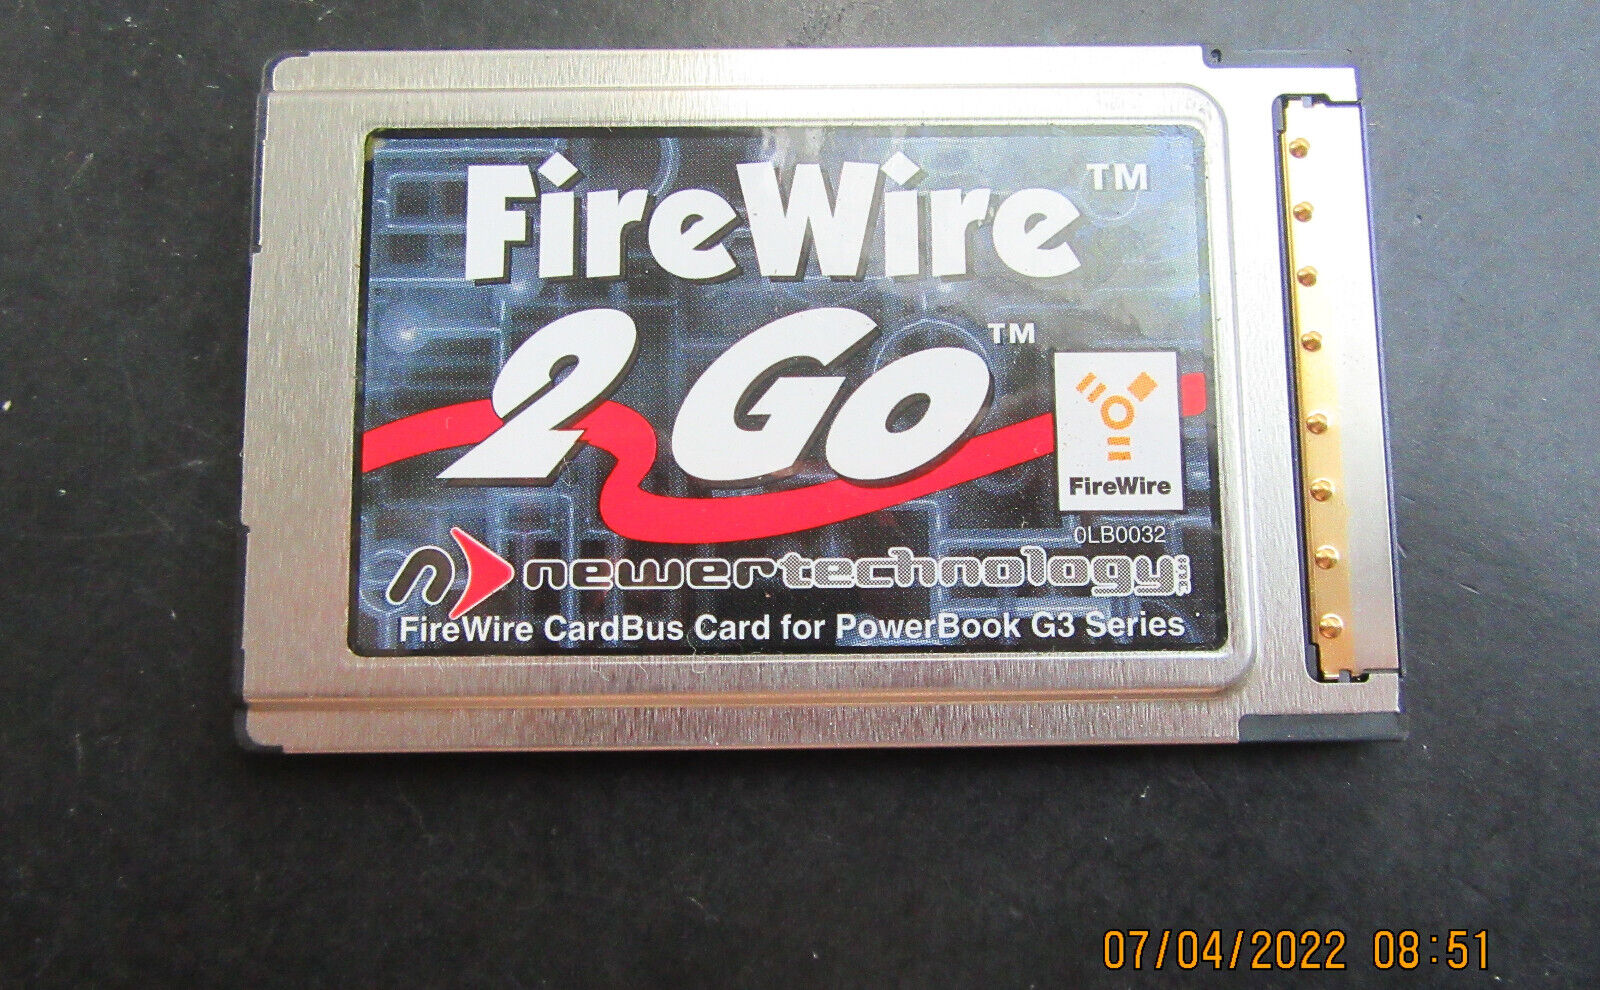 Genuine Newer Technology Firewire 2 Go Pcmcia Card For Powerbook G3 Series